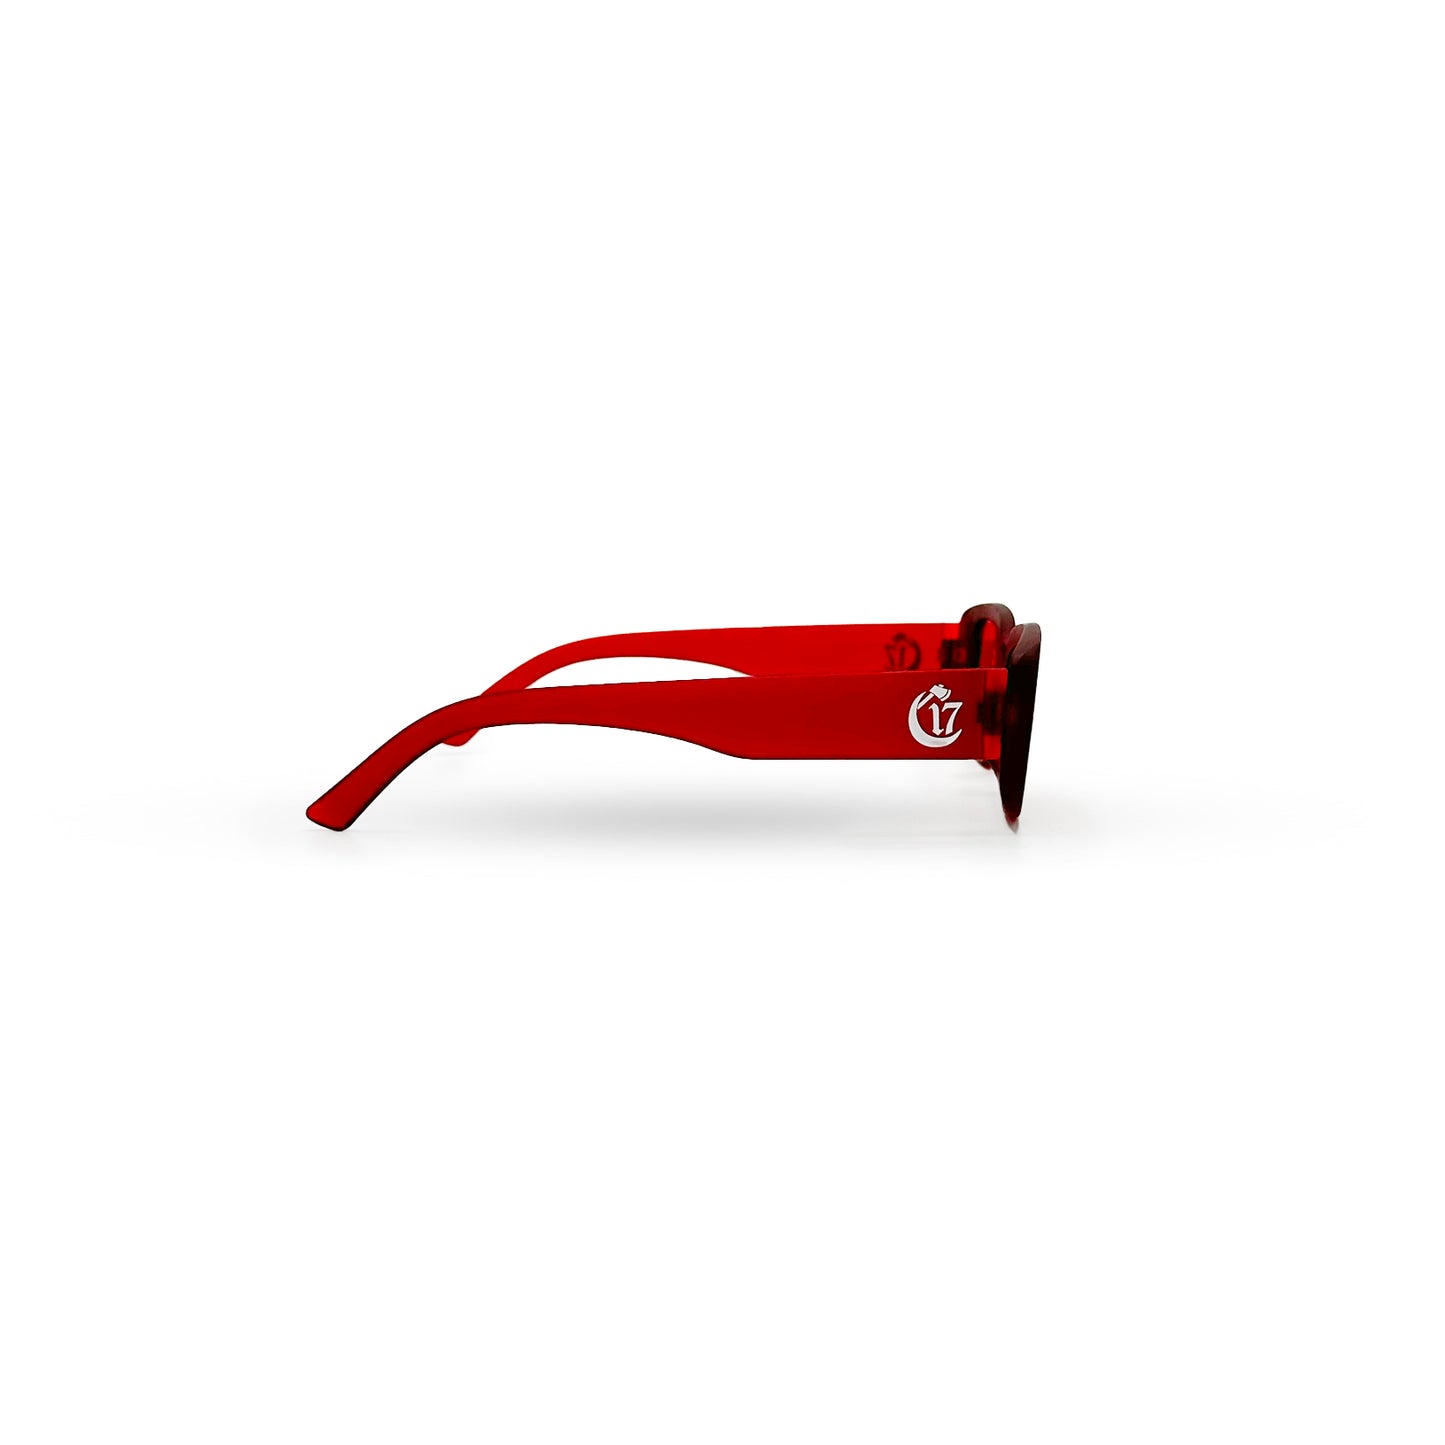 Chapter 17 Low Profile Sunglasses - MURDA VISION RED